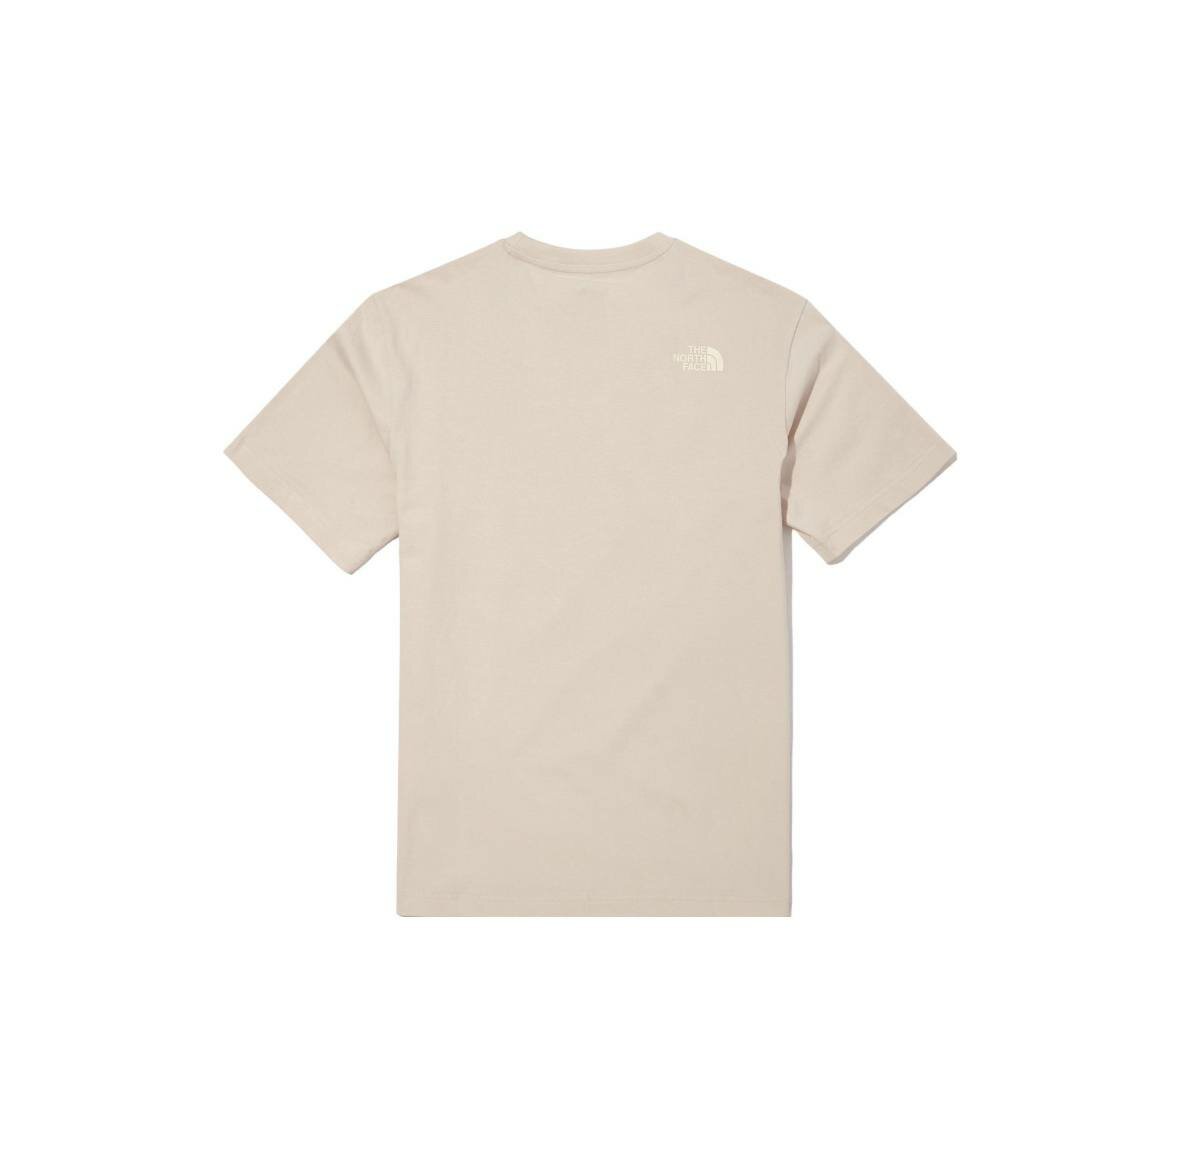 Футболка The North Face SS22 Cotton Basic